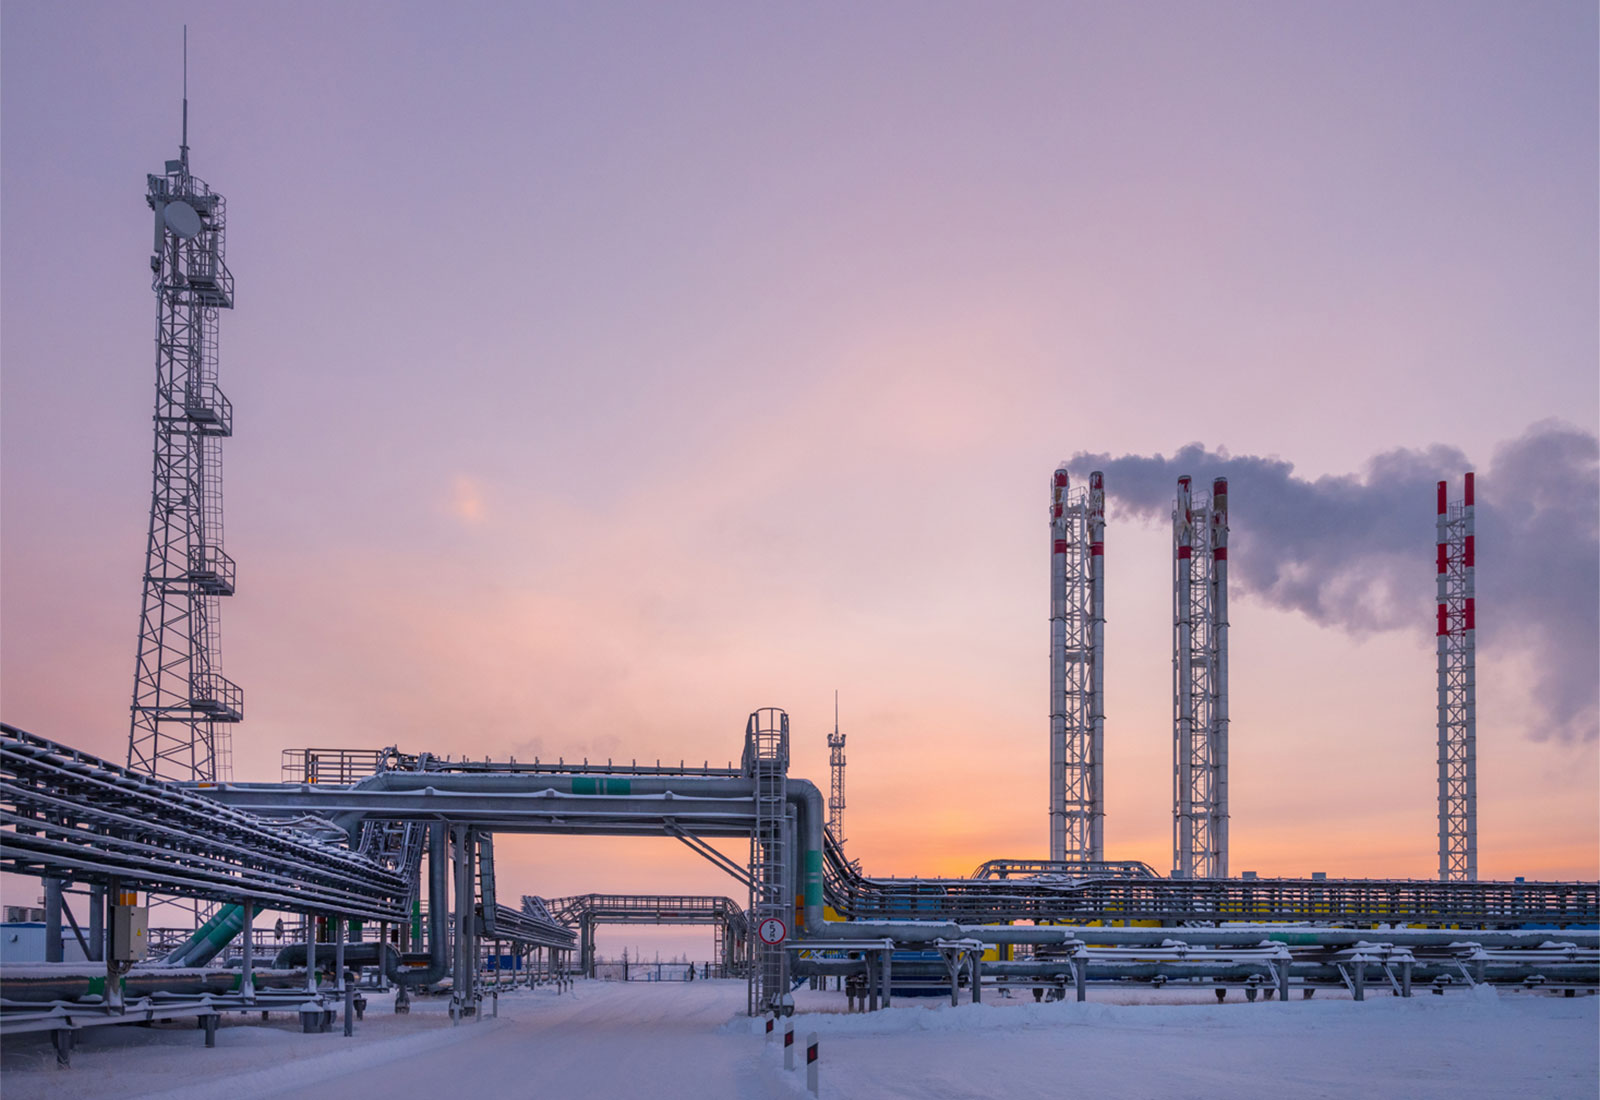 Natural gas refinery pipeline, tower, and smokestacks in front of a sunset